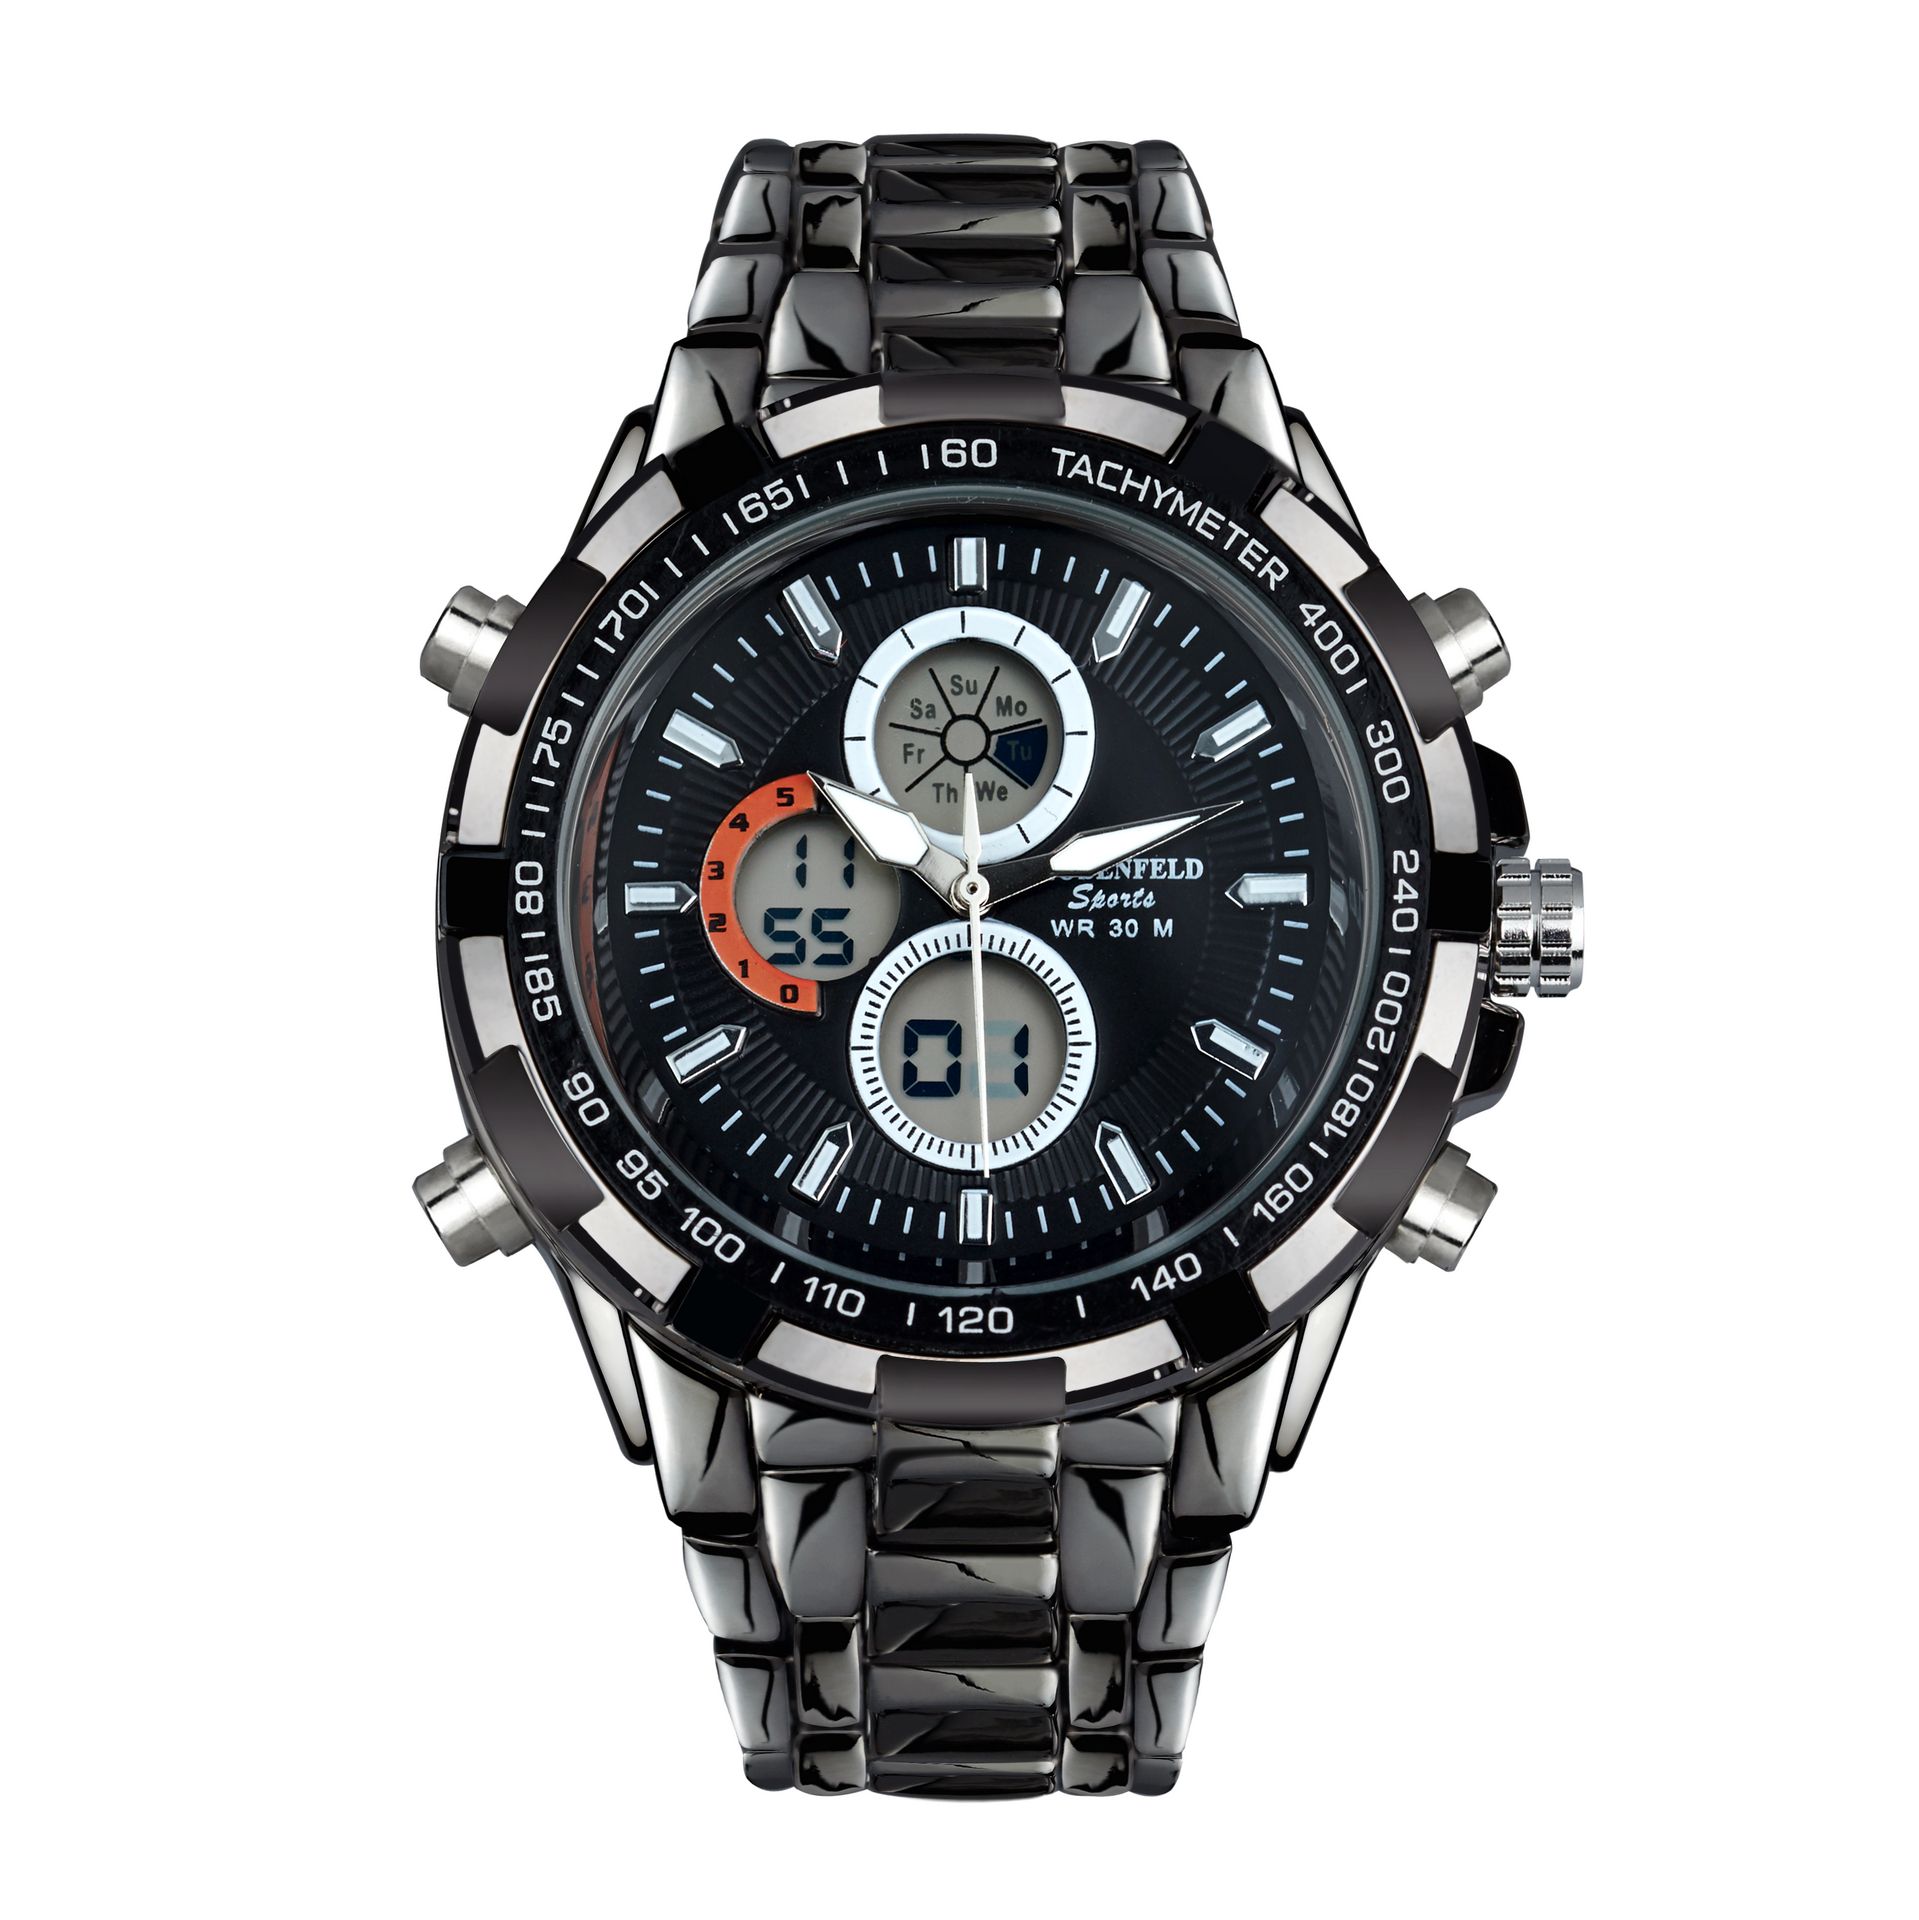 V Brand New Gents Globenfeld Black Sports Watch RRP 440.00 With Box - Warranty - Papers Etc (Image